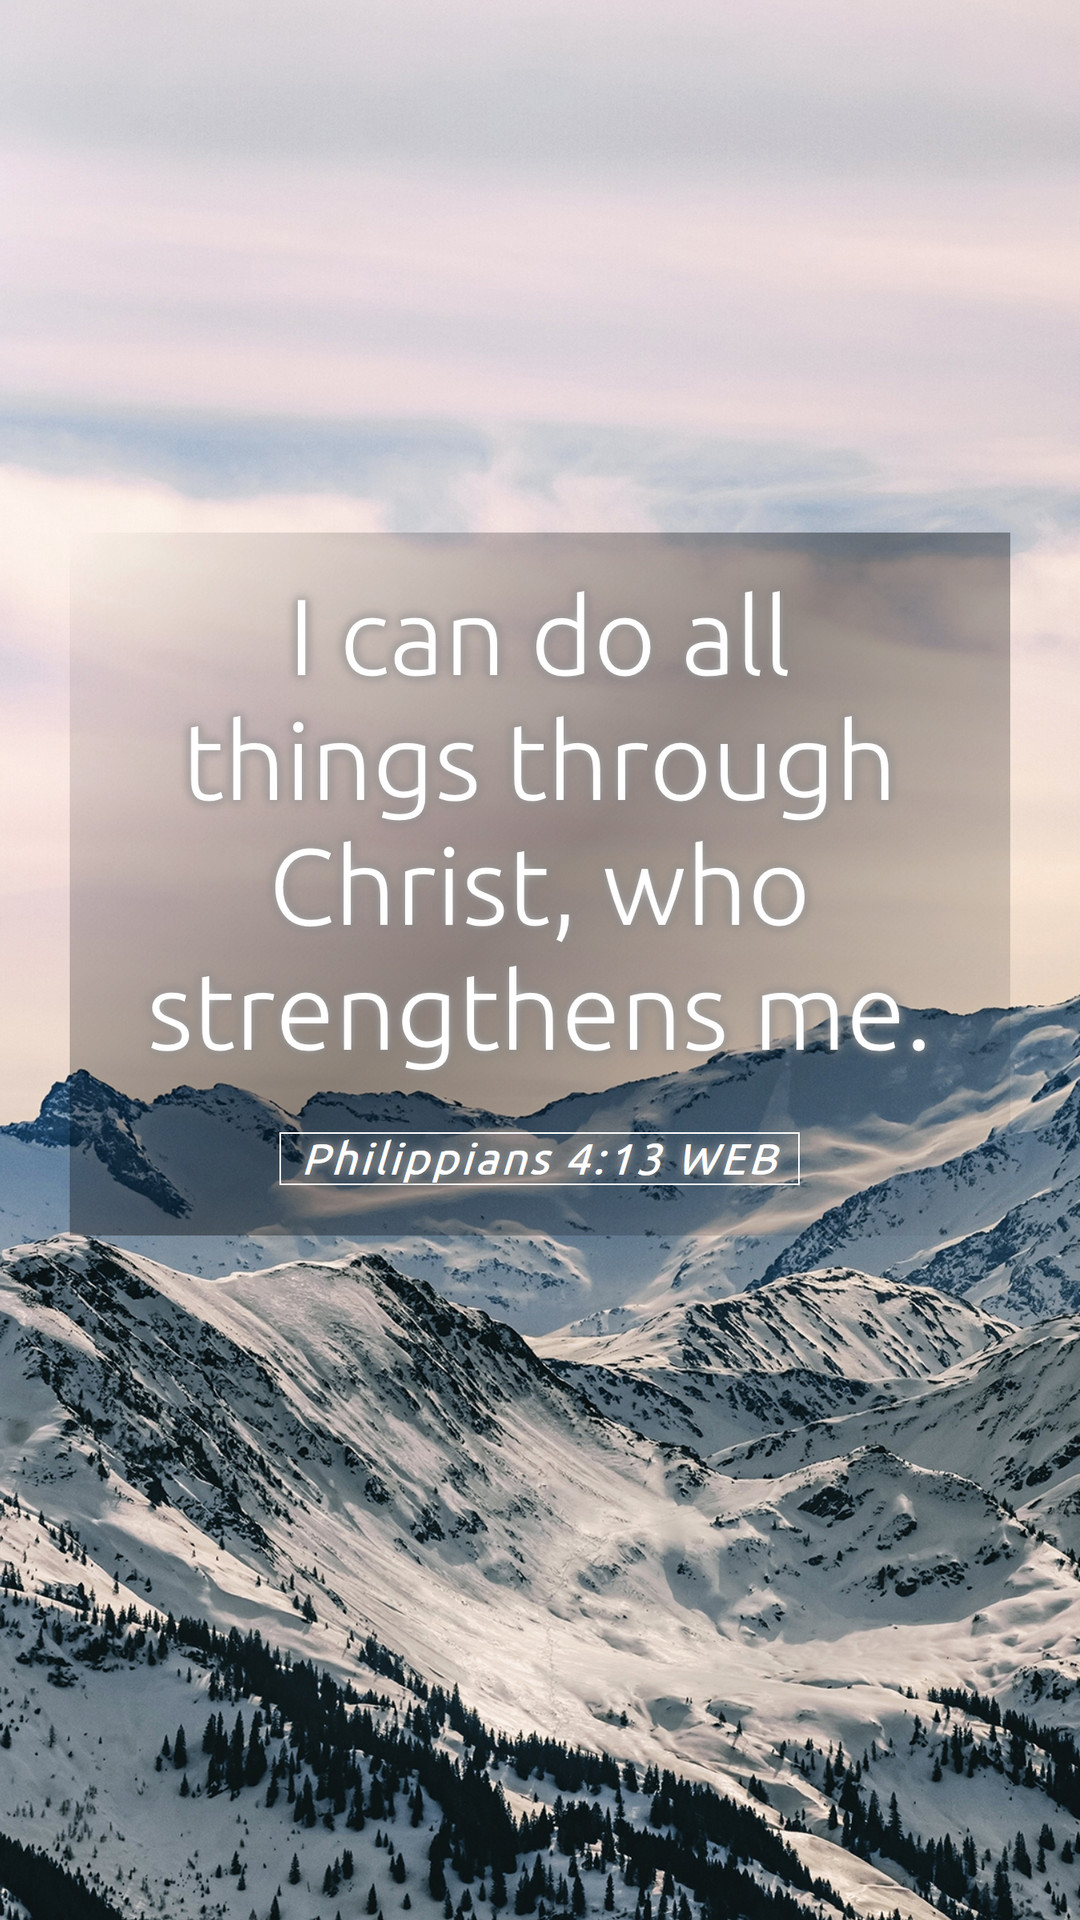 Philippians 4:13 WEB Mobile Phone Wallpaper can do all things through Christ, who